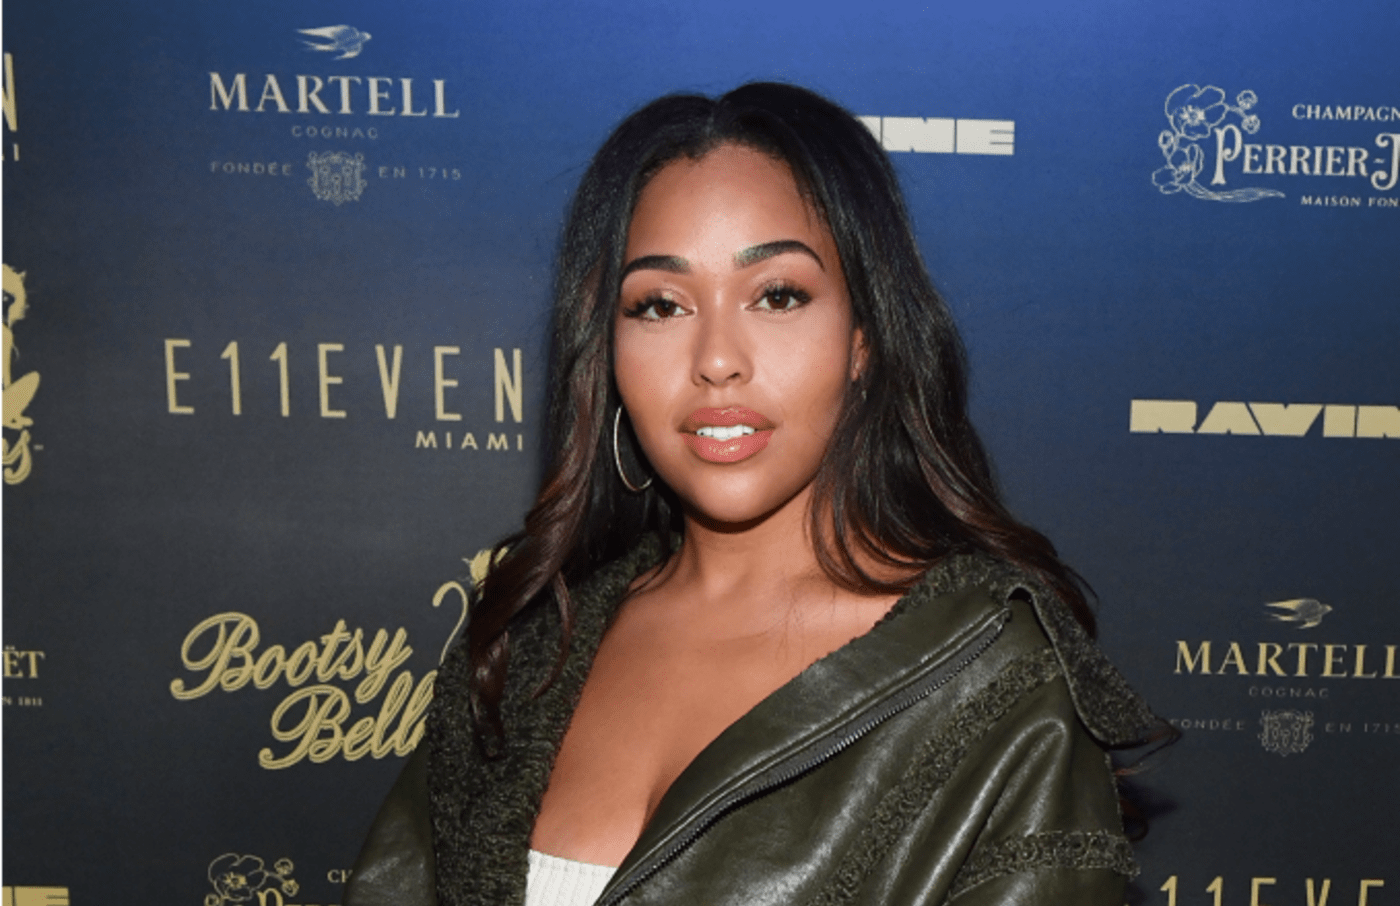 Jordyn woods attends French Montana Performance